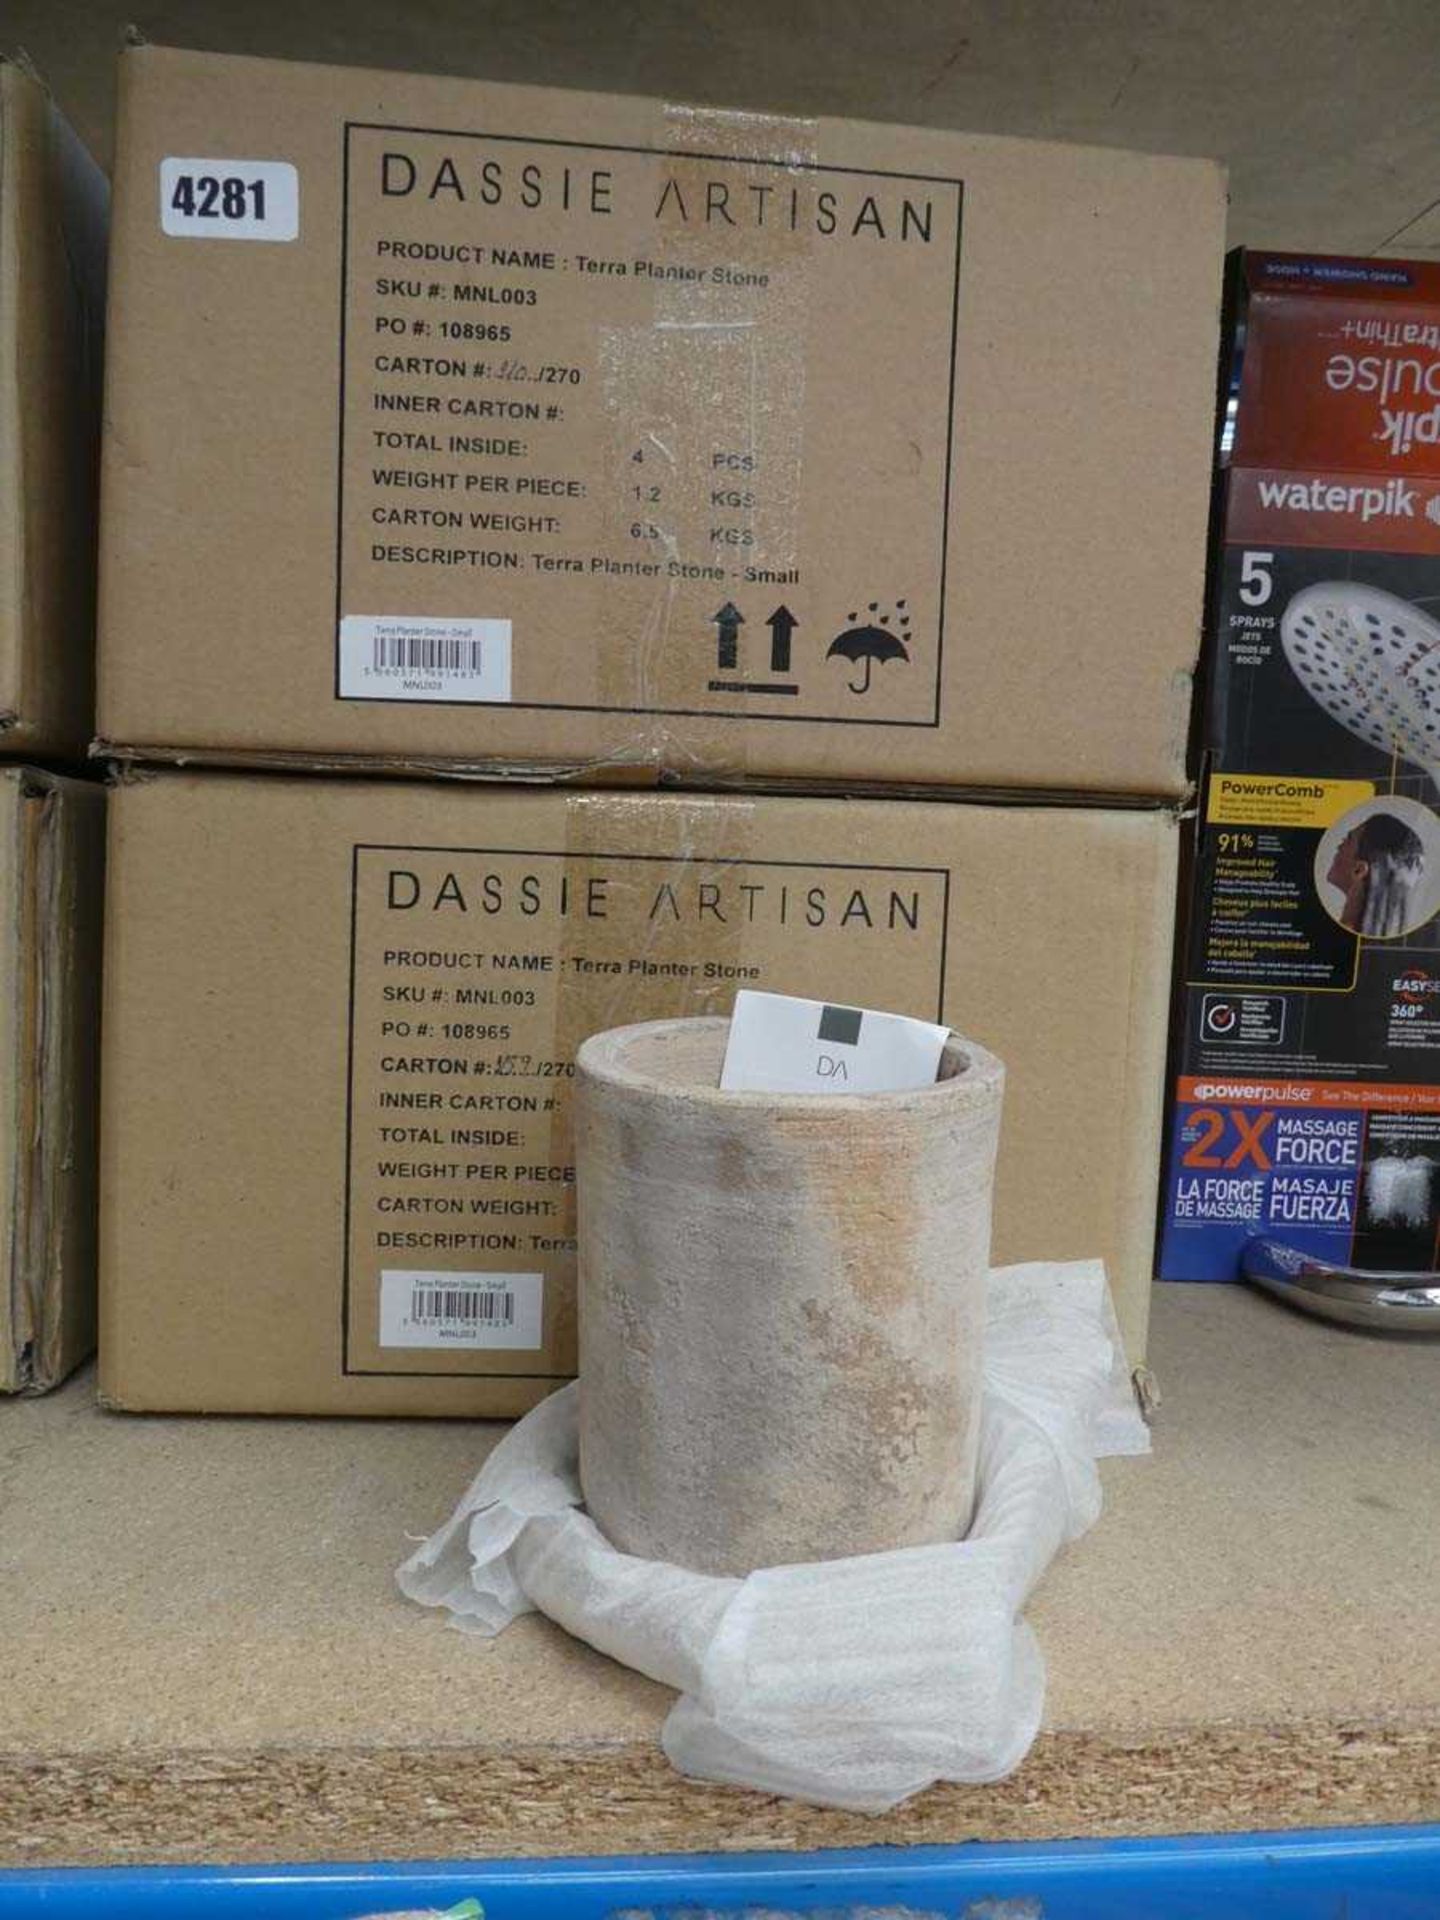 Two boxes of Dassie Artisan terra planter stone plant pots with four pots in a box